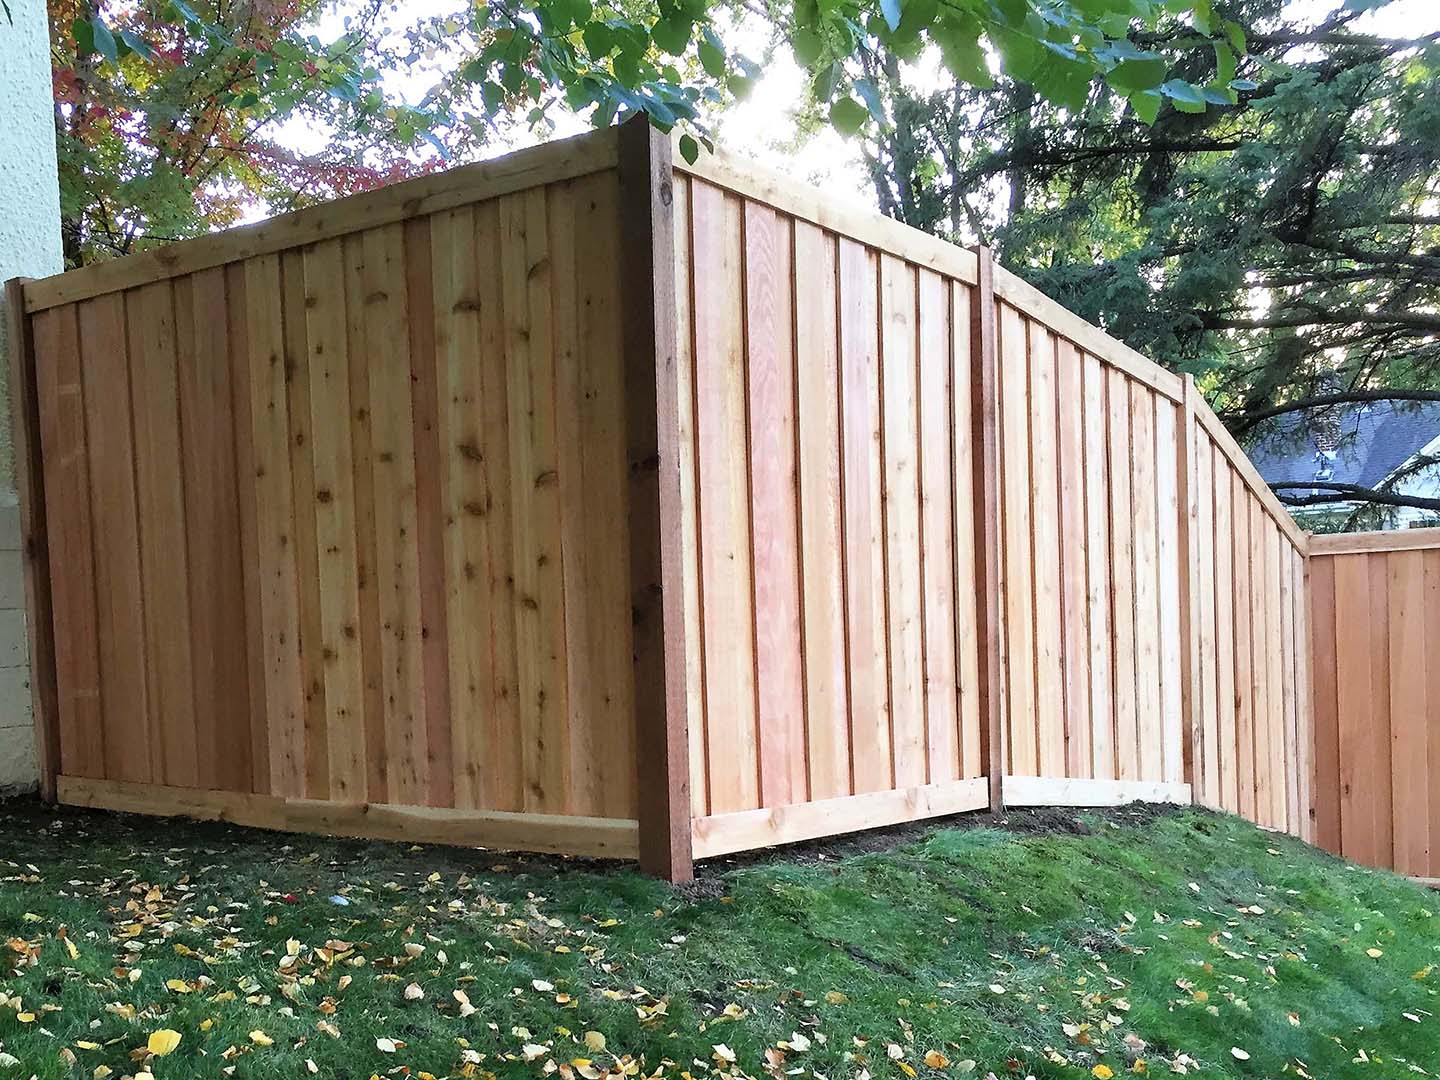 St. Paul MN cap and trim style wood fence